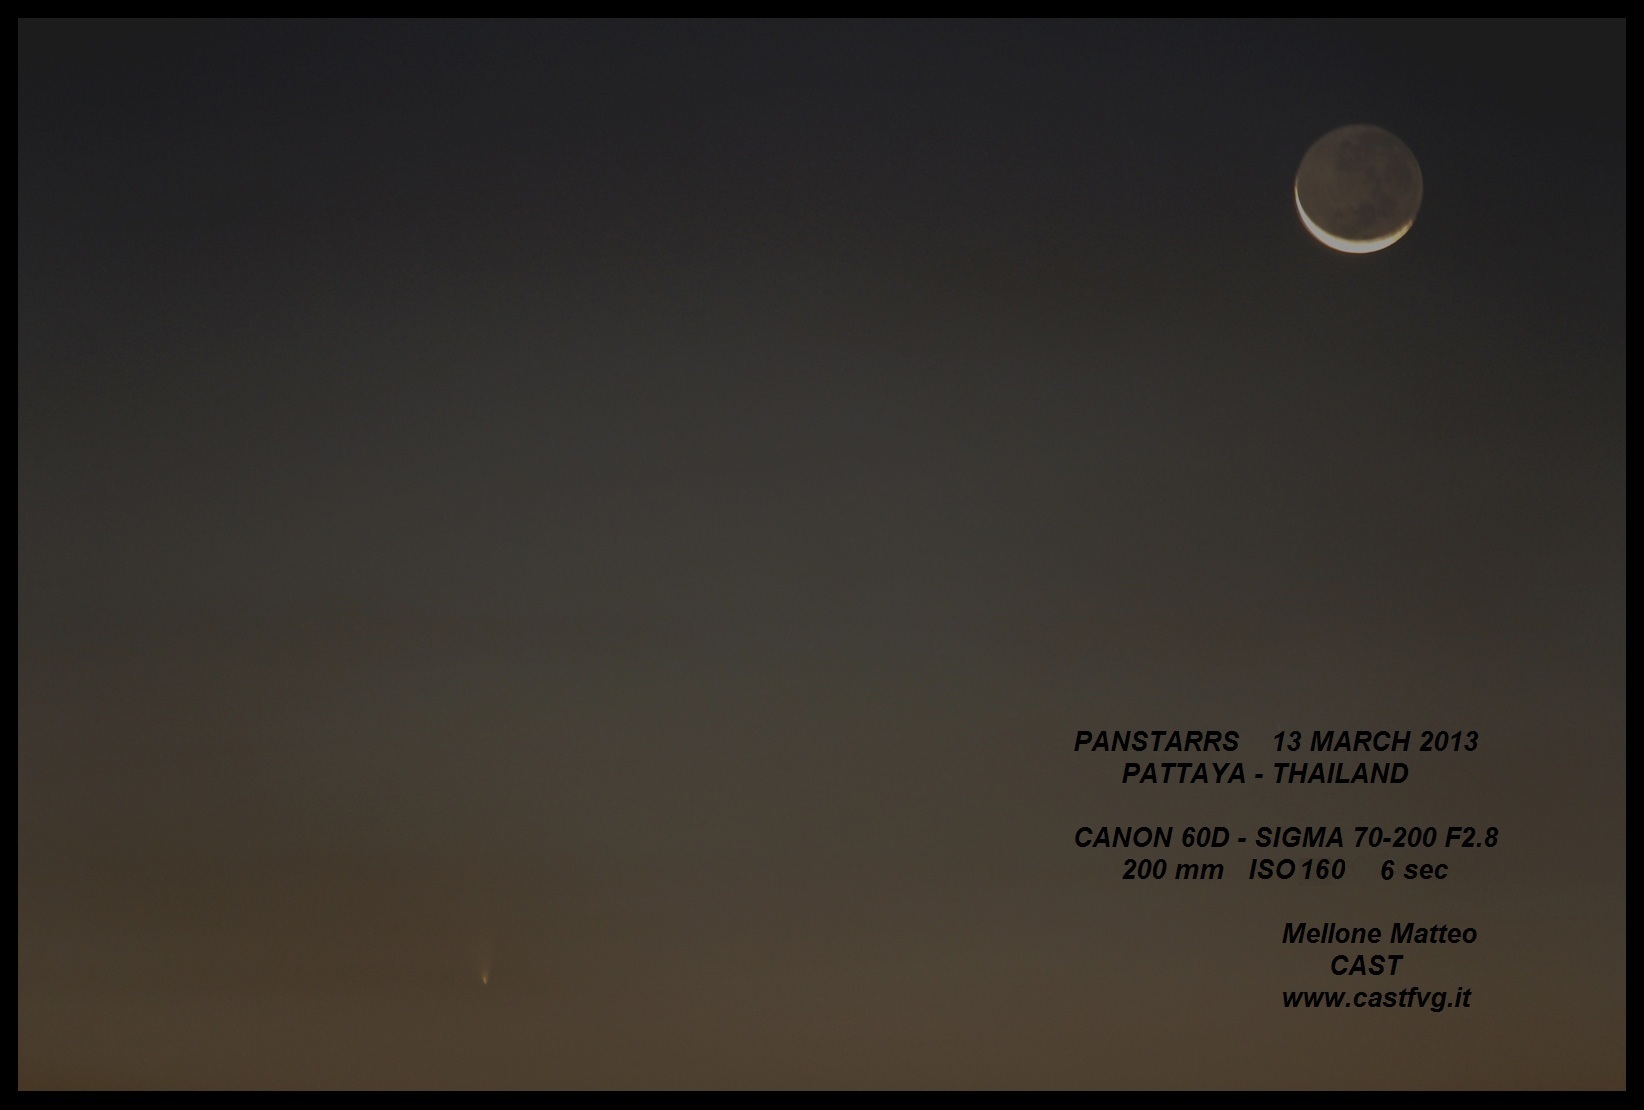 C/2011 L4 (PanStarrs) taken in Thyland in march 13, 2013: 206 KB; click on the image to enlarge